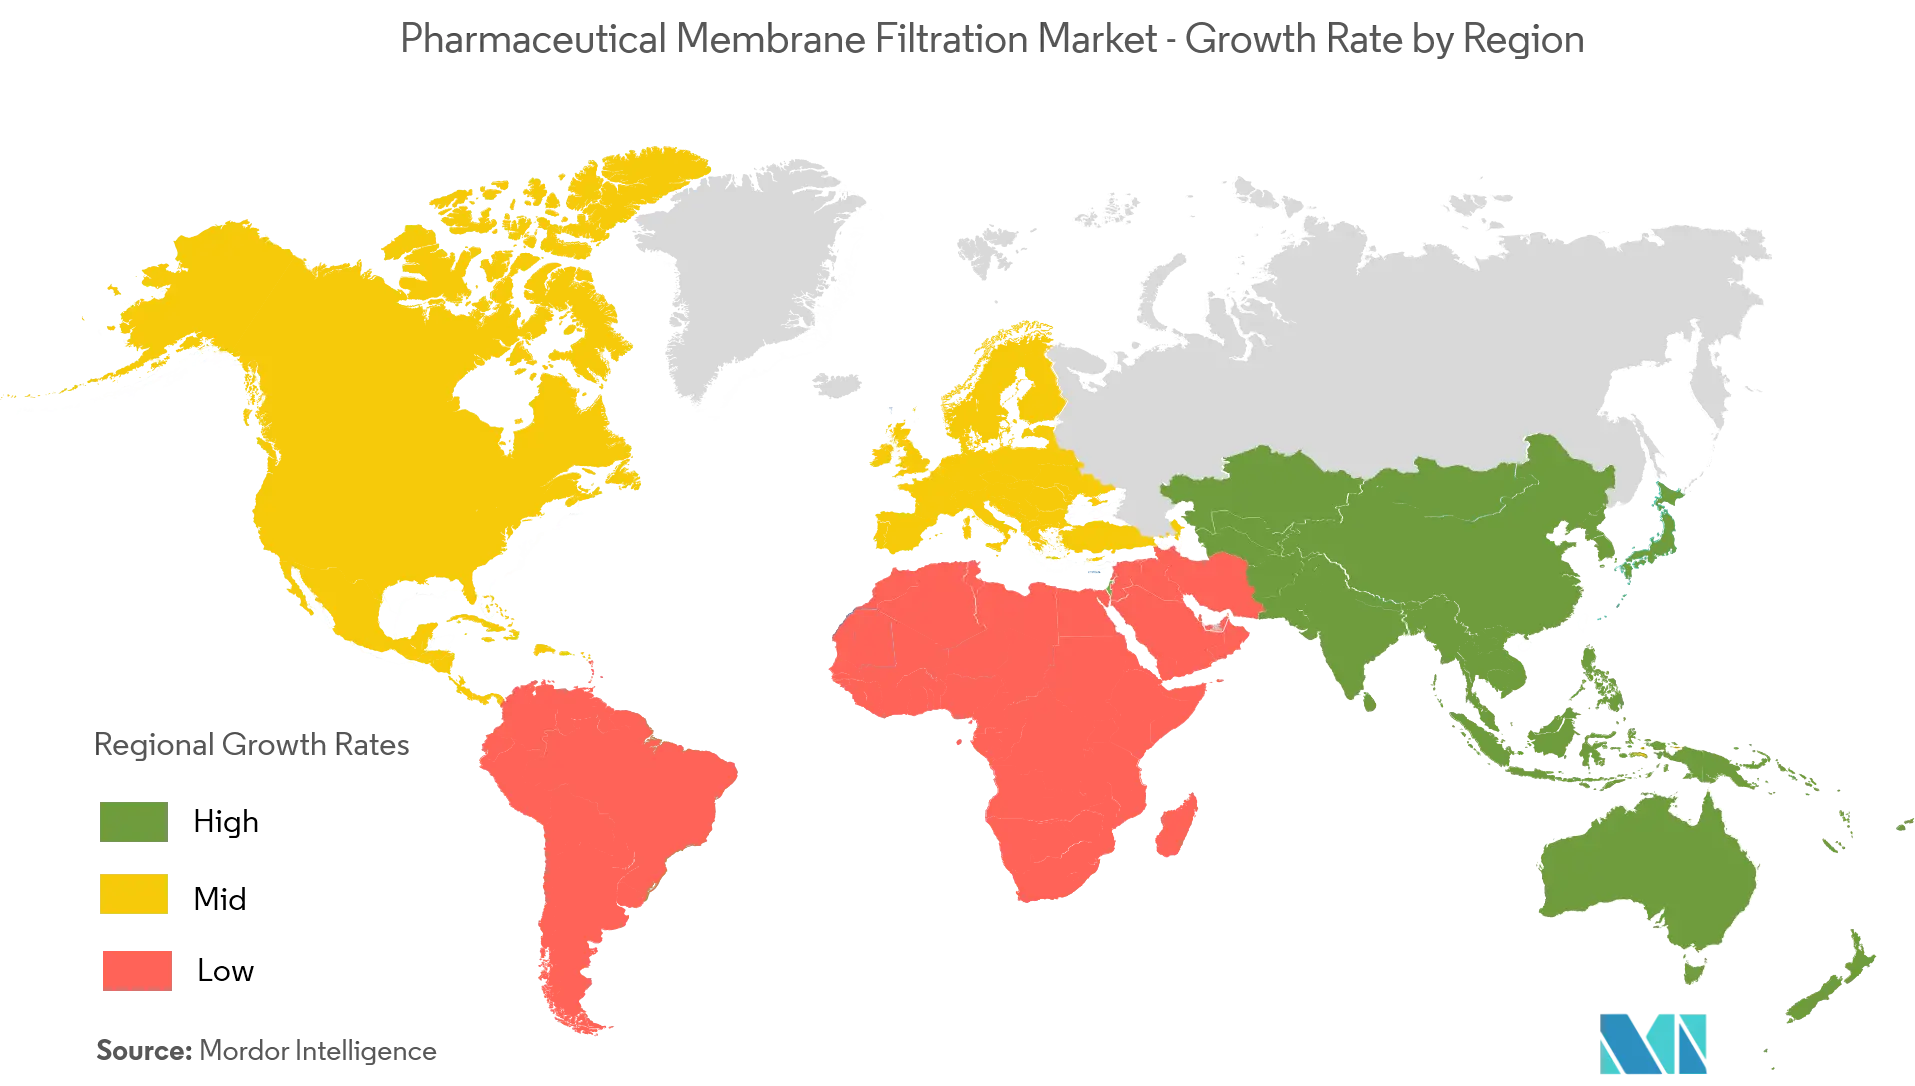 Pharmaceutical Membrane Filtration Market - Growth Rate by Region